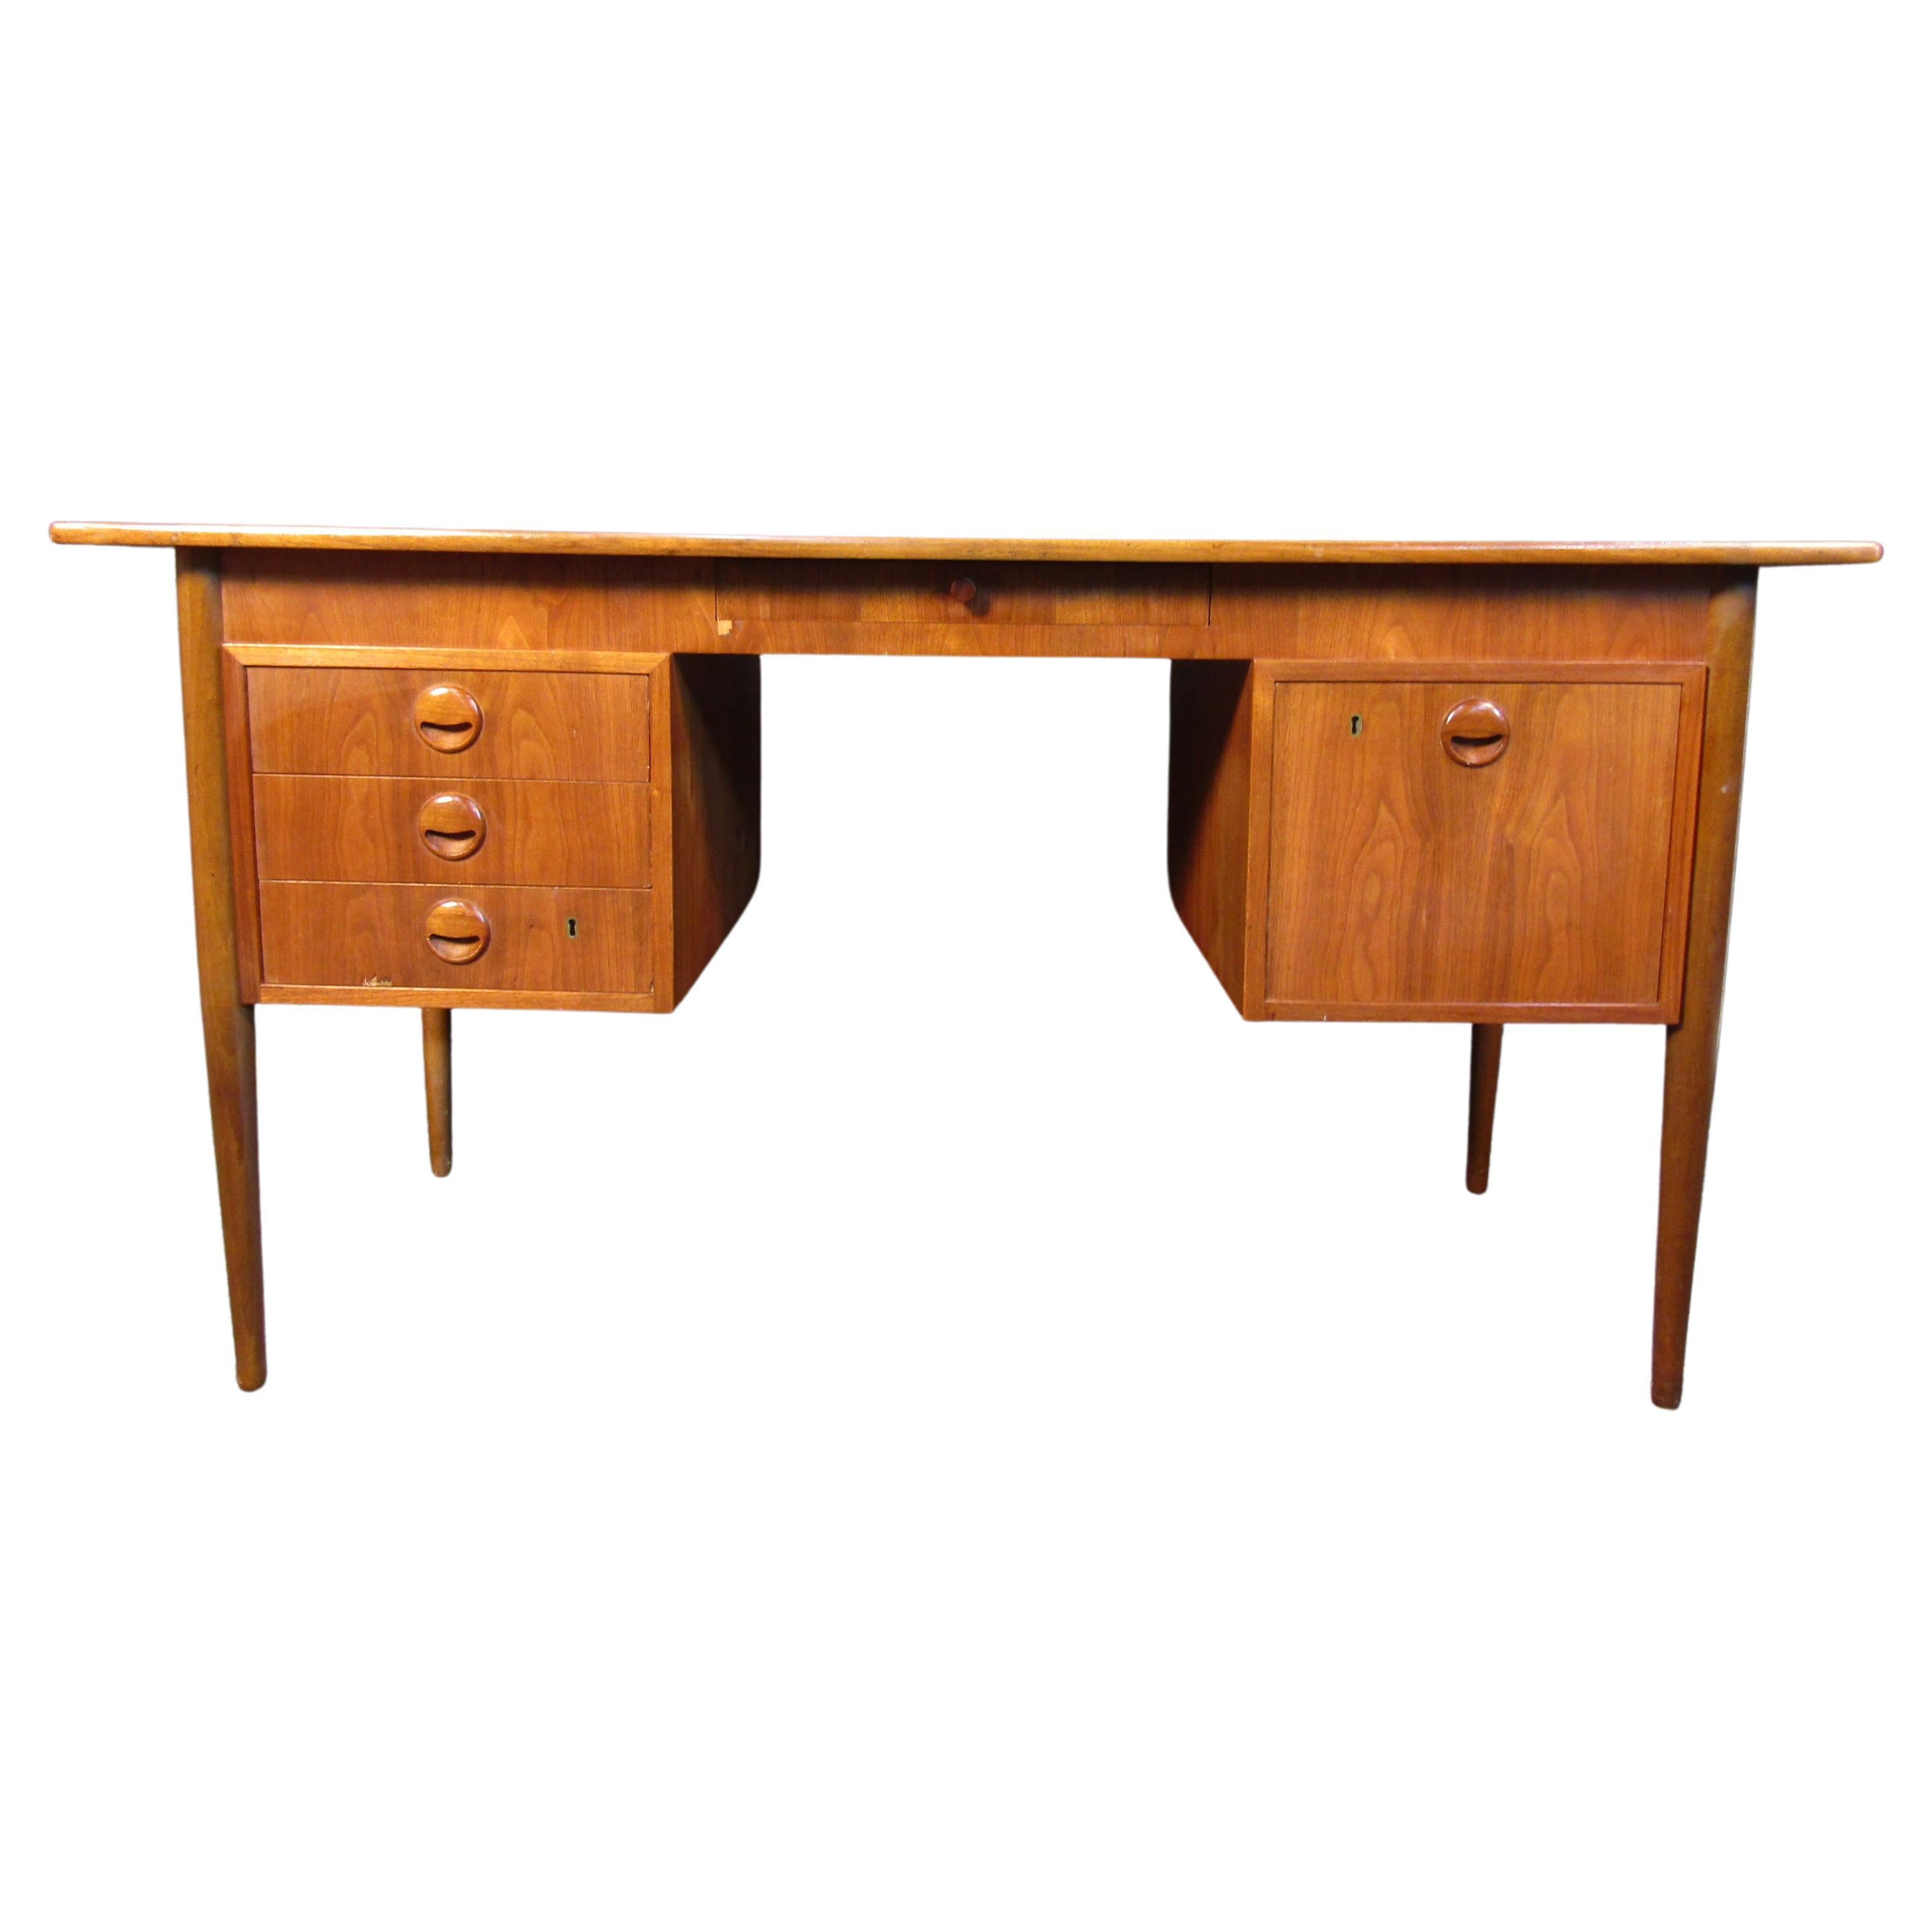 Terrific Maurice Villency mid-century teak desk. Large work surface and 5 drawers for ample storage and organization. Sculpted drawer pulls and legs add a stylish finishing touch to this vintage writing desk. Please confirm item location with seller